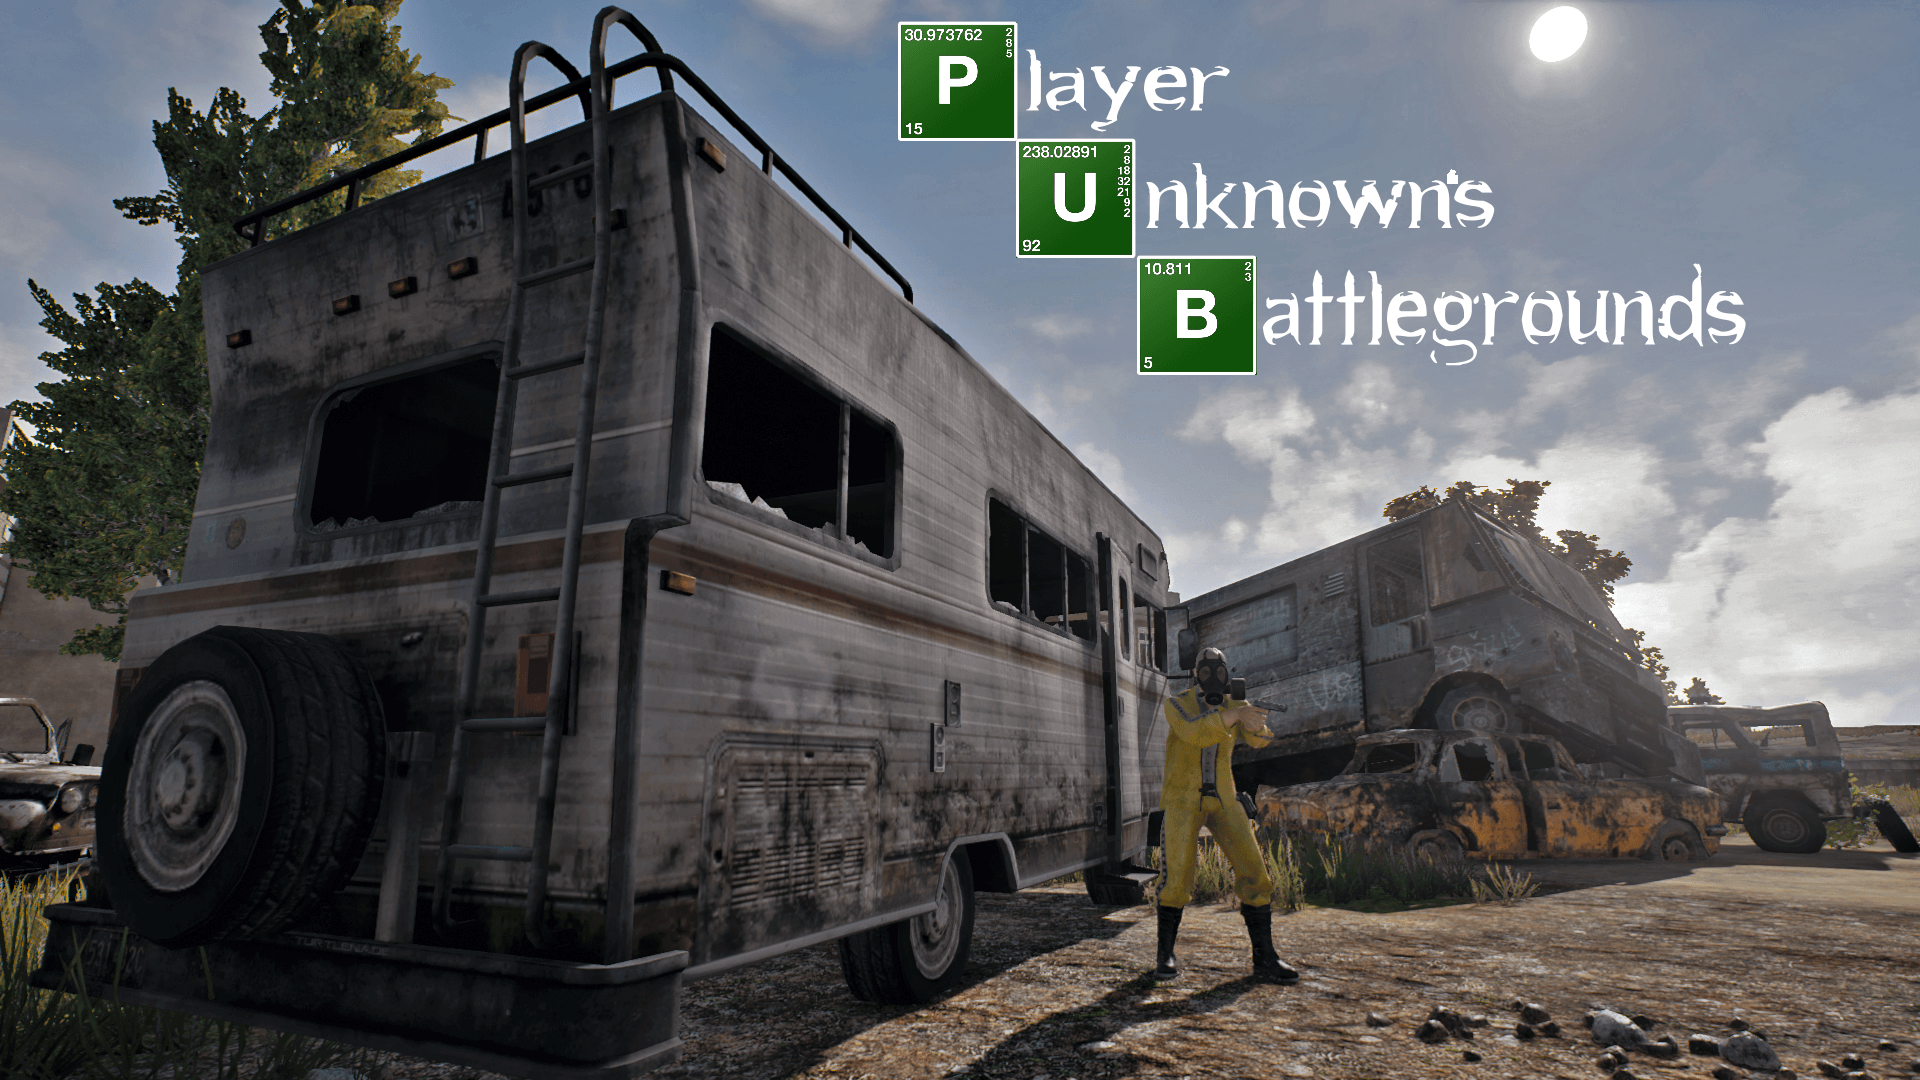 Made a PUBG Wallpaper of Breaking Bad 1920 x 1080